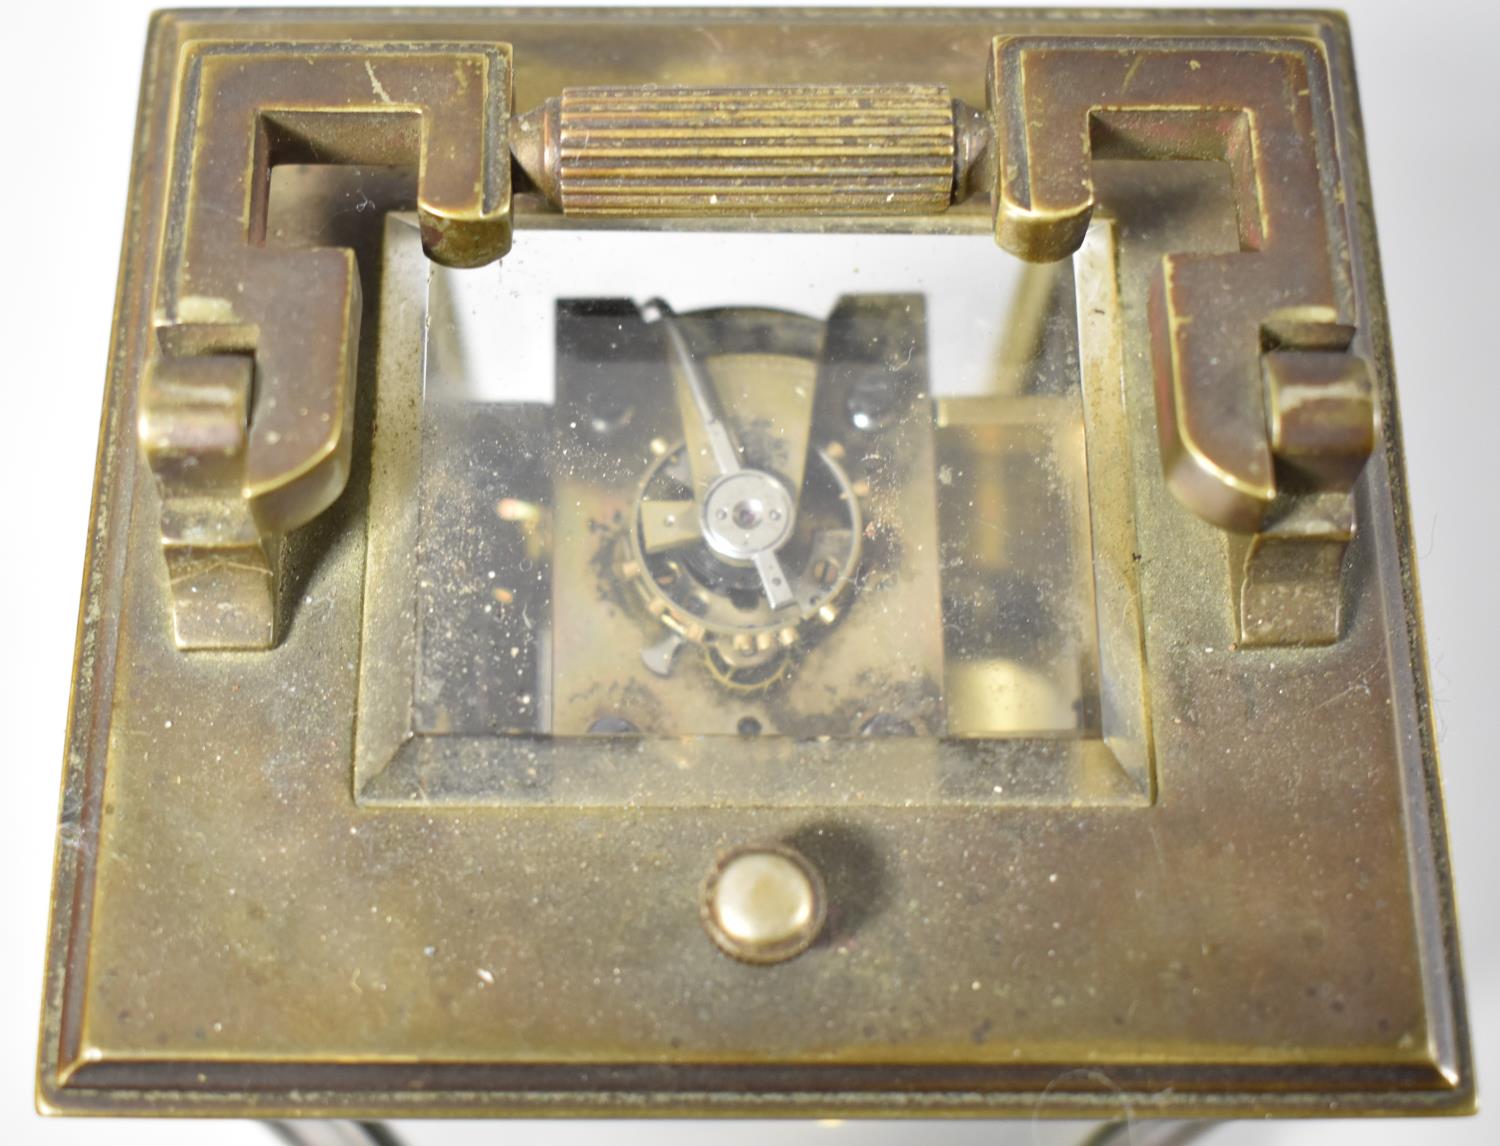 A Late 19th Century French Brass Carriage Clock with Repeater Movement, Repeater Button Working - Image 2 of 2